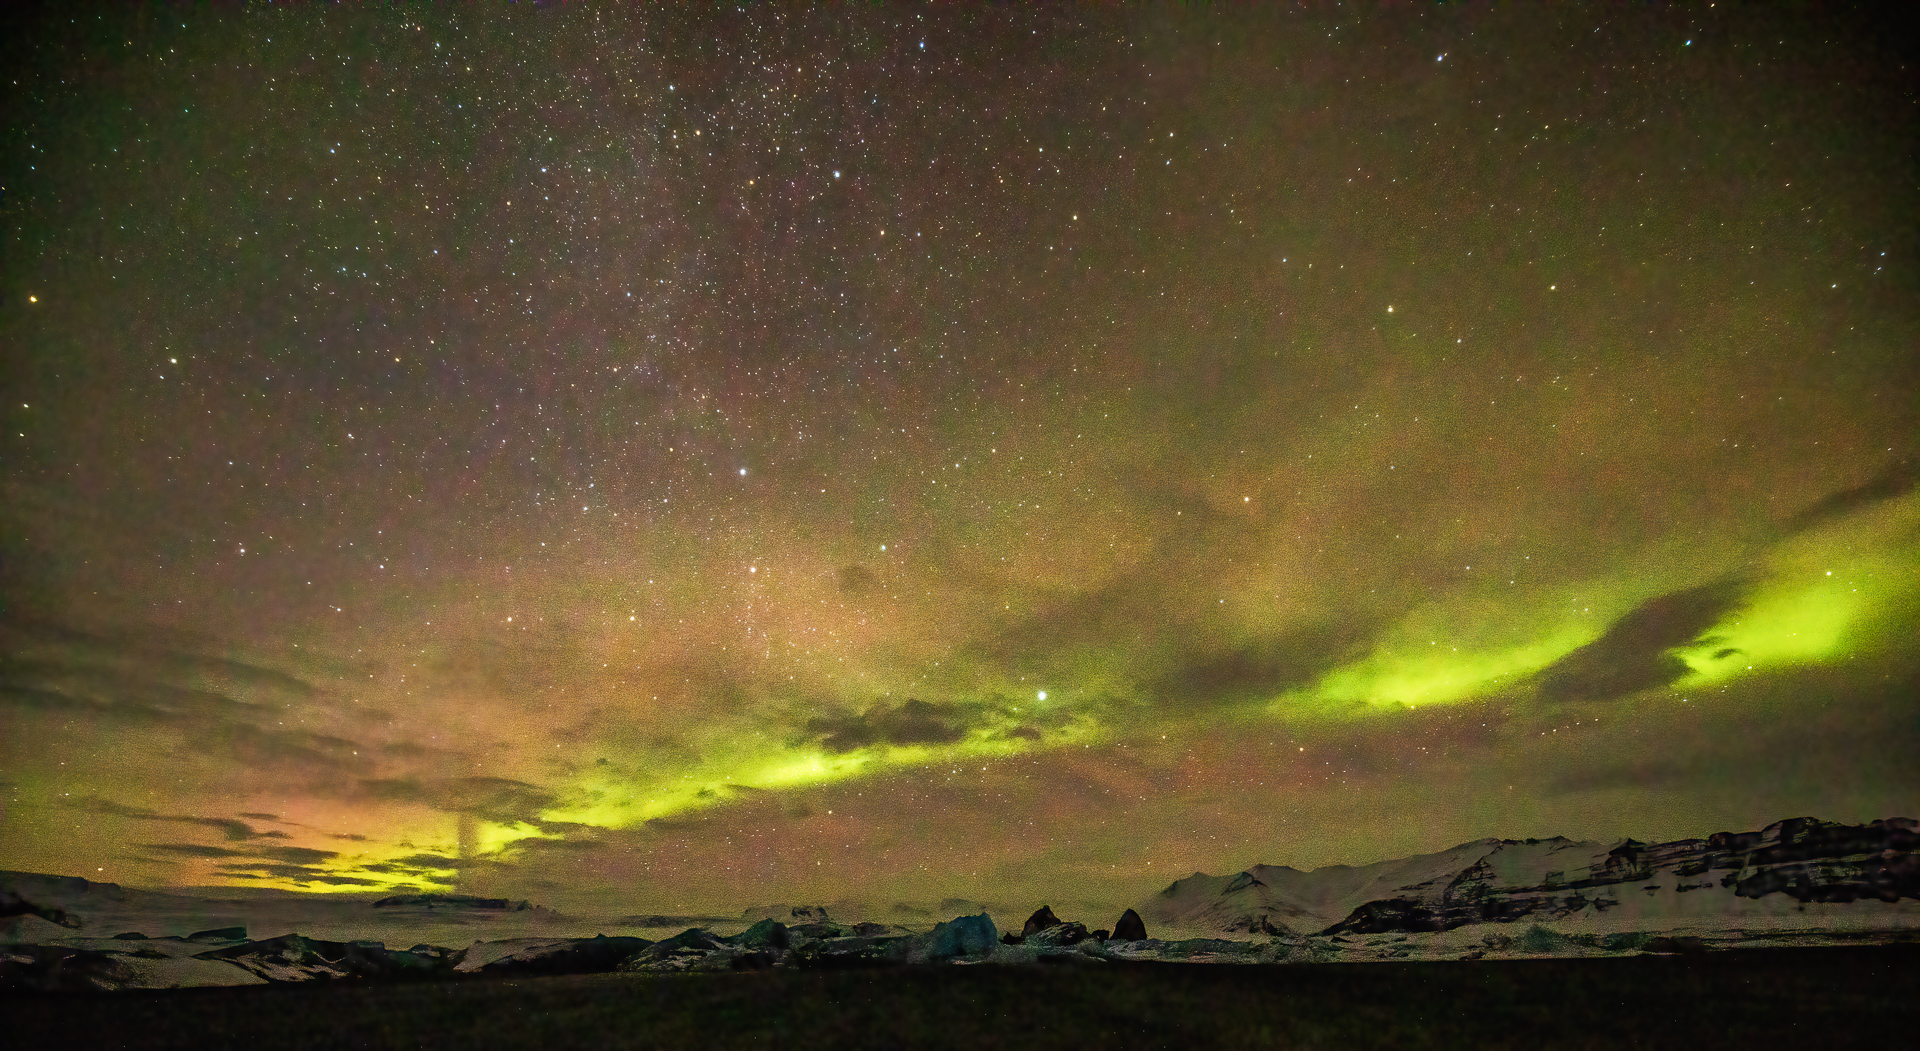 A photo of aurora borealis lights and many stars above a hilly snow-covered landscape. The sky appears to have pink, gray, and lime green hues. 